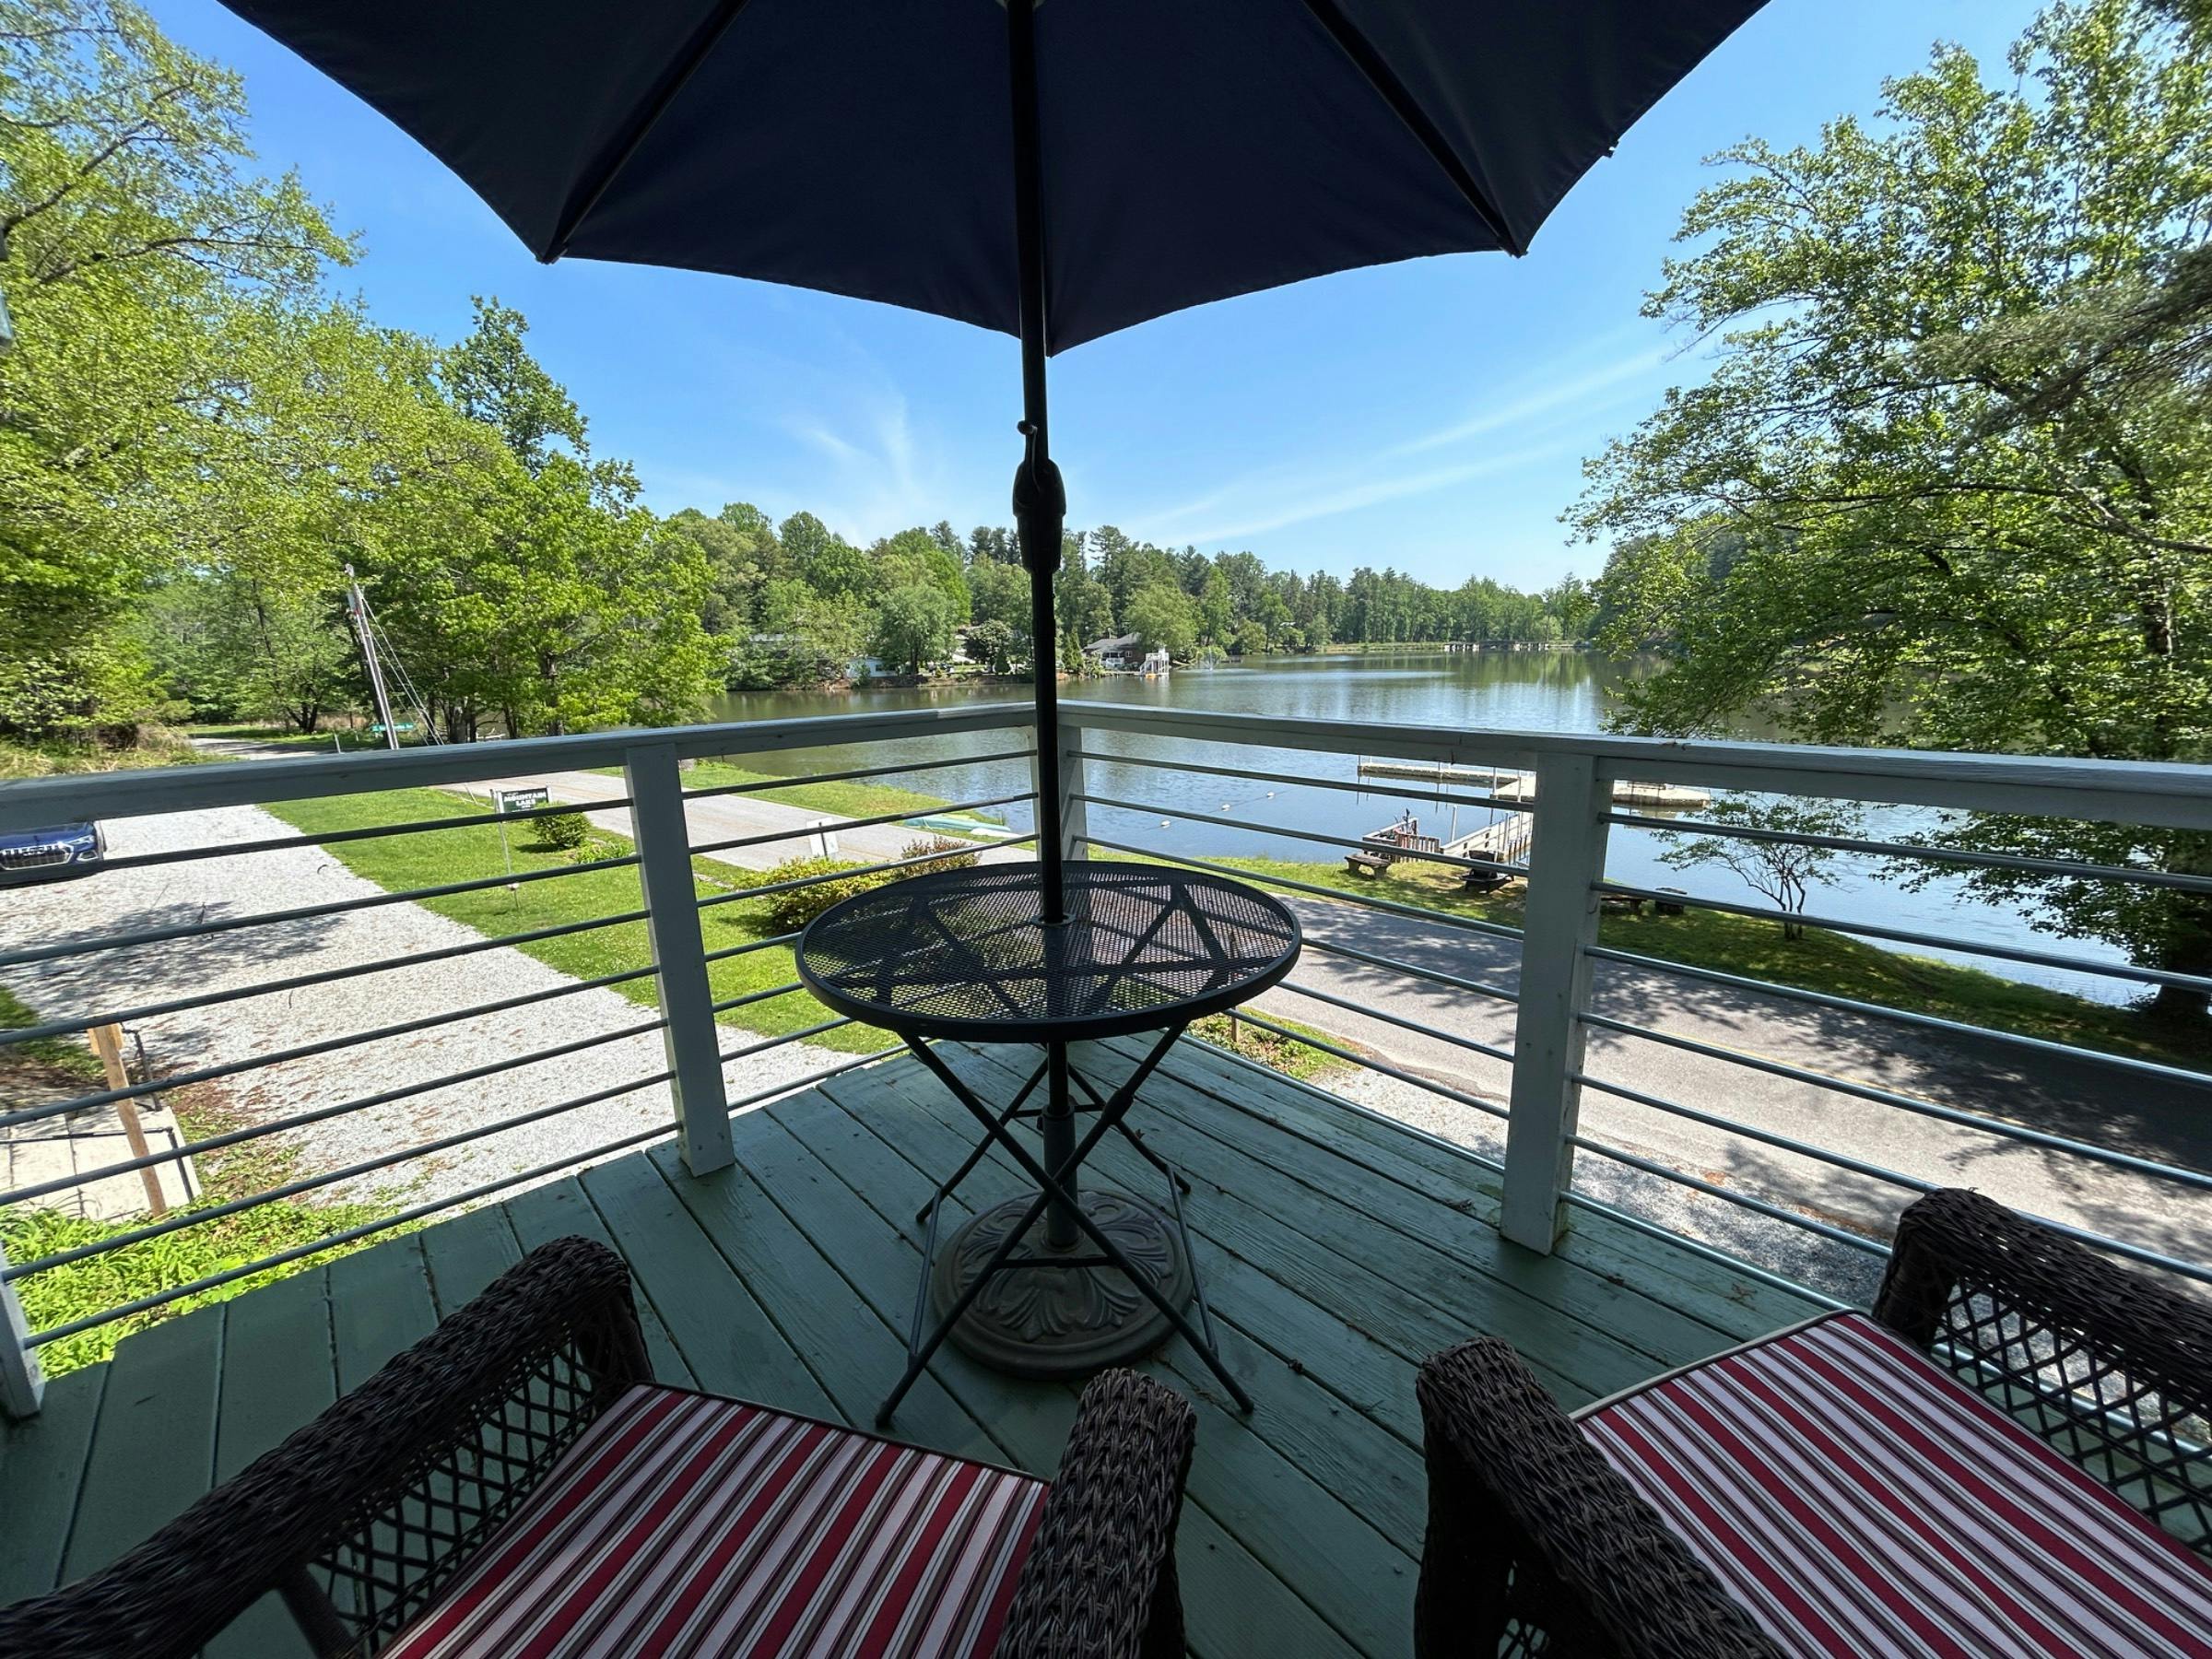 View from your own deck with 2 comfy chairs and an umbrella if needed 